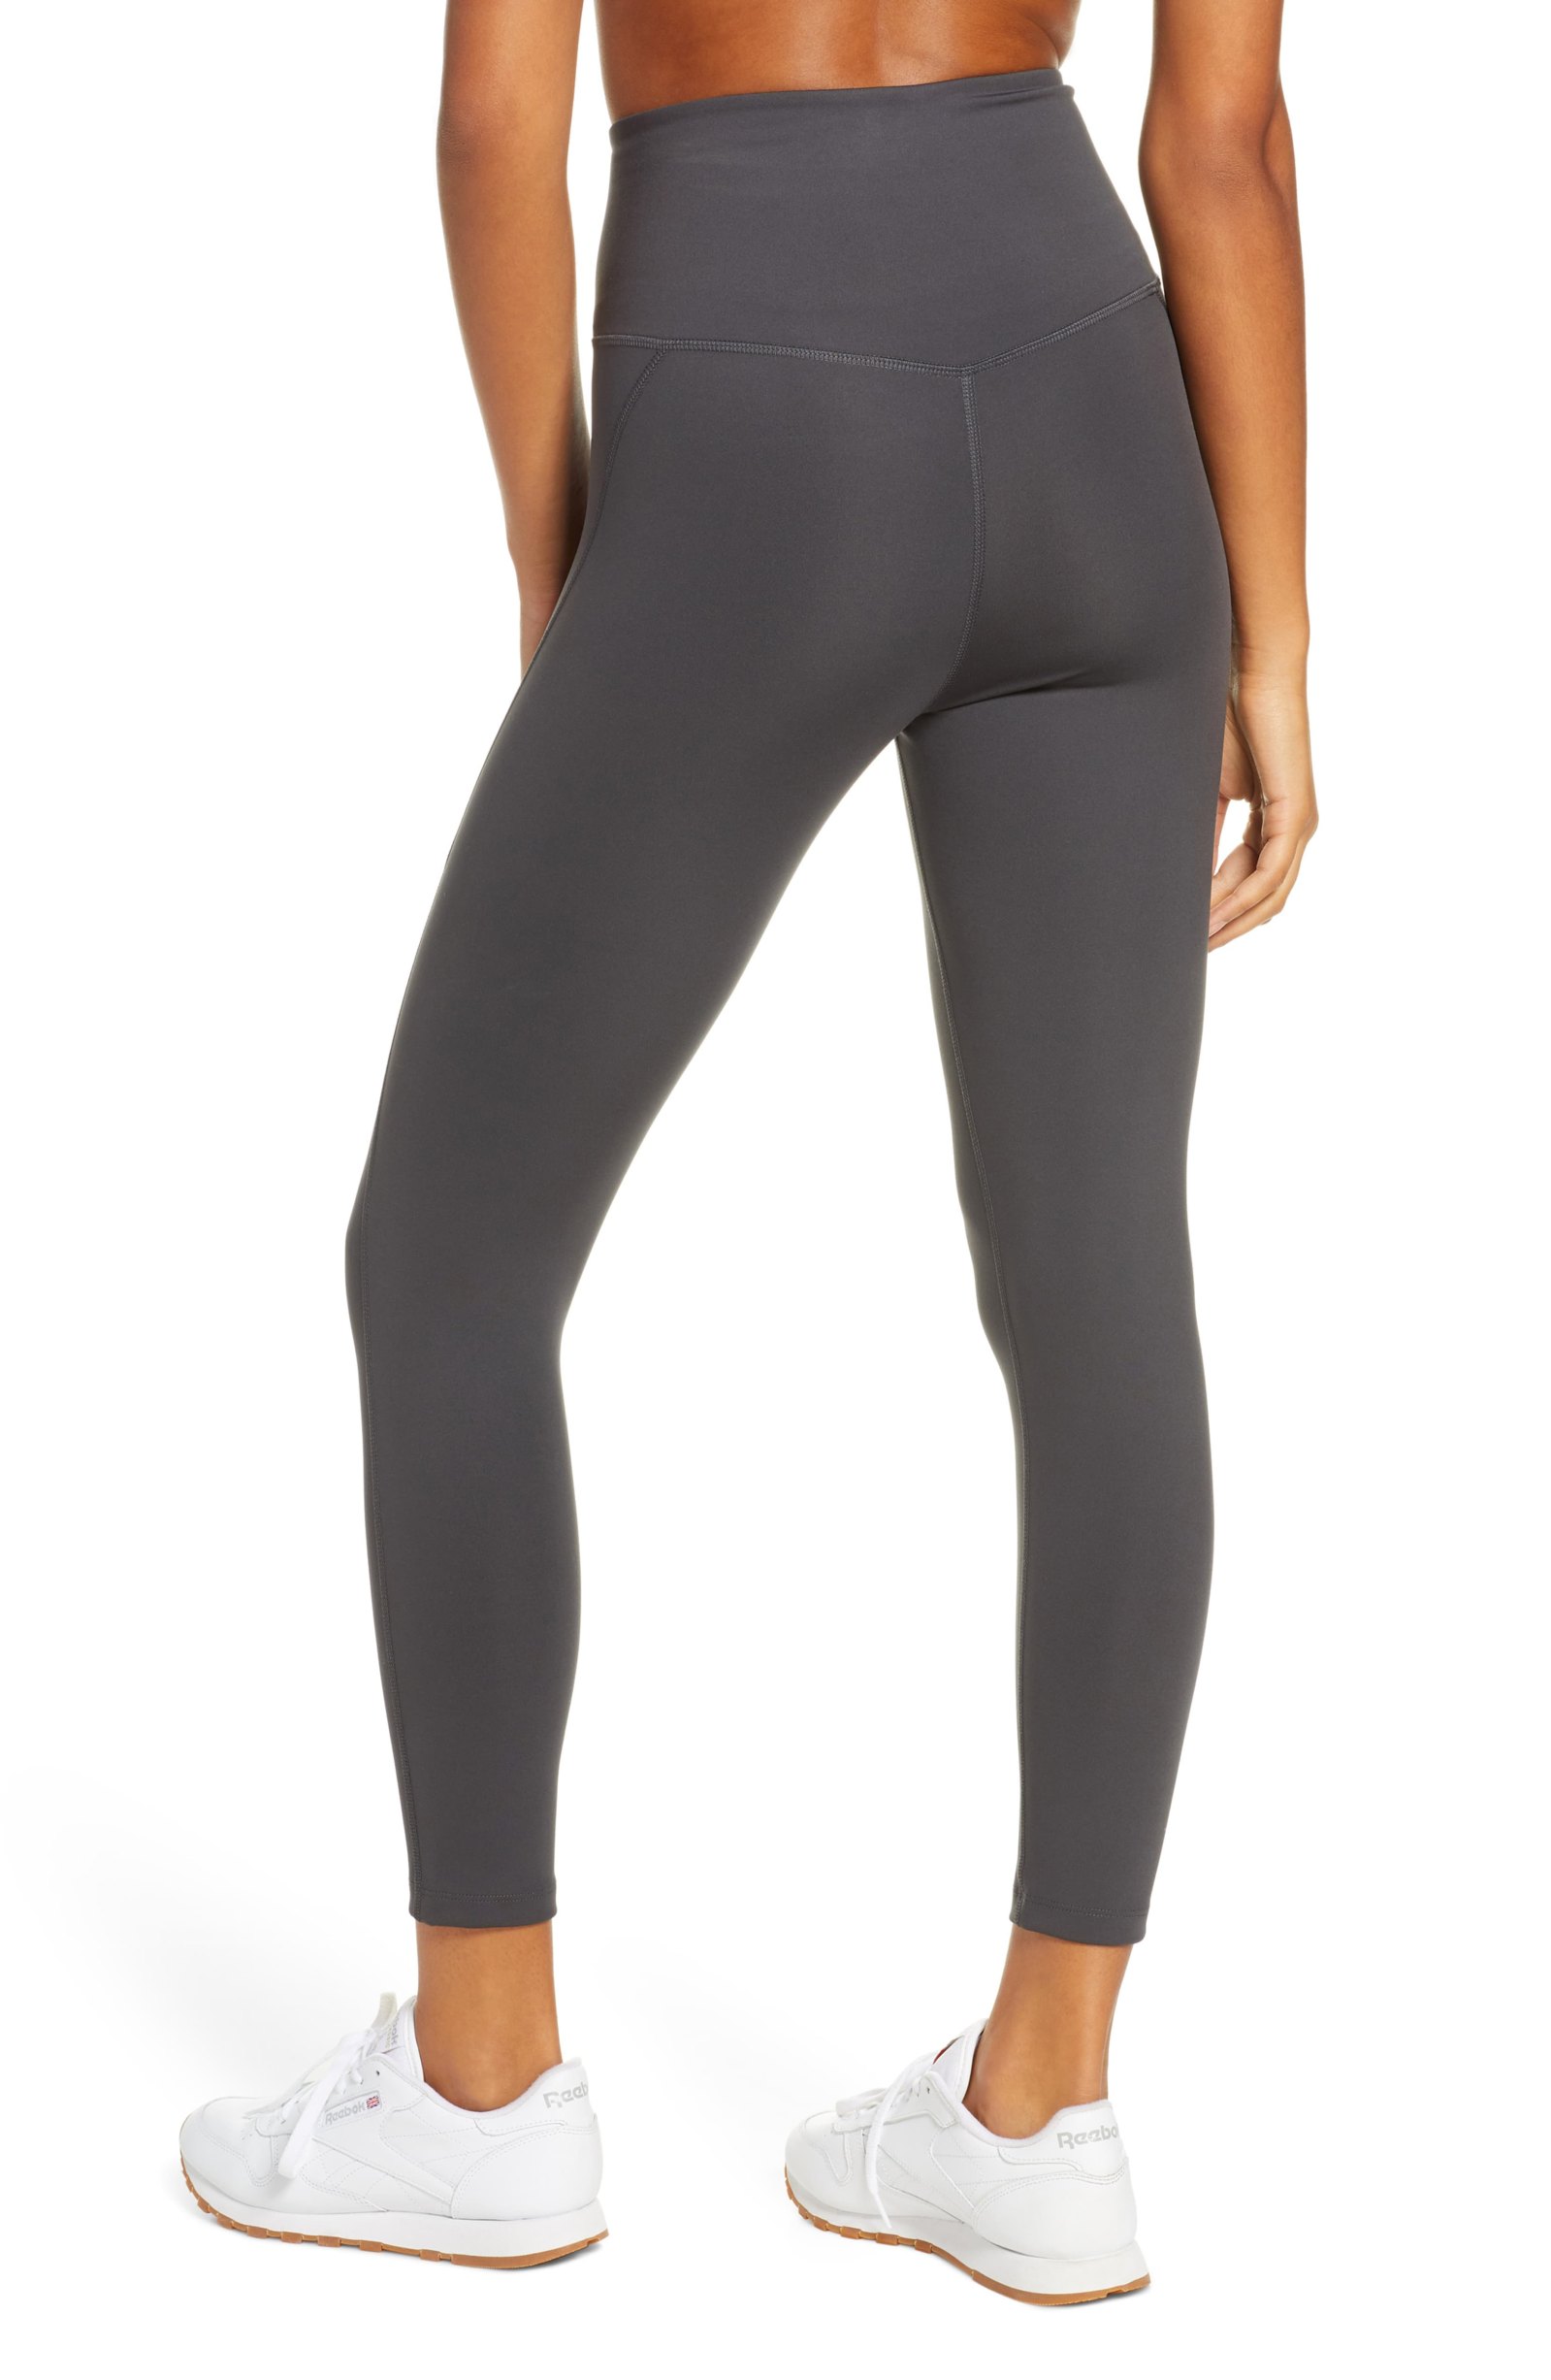 Girlfriend Collective Leggings Are Flattering in Every Color